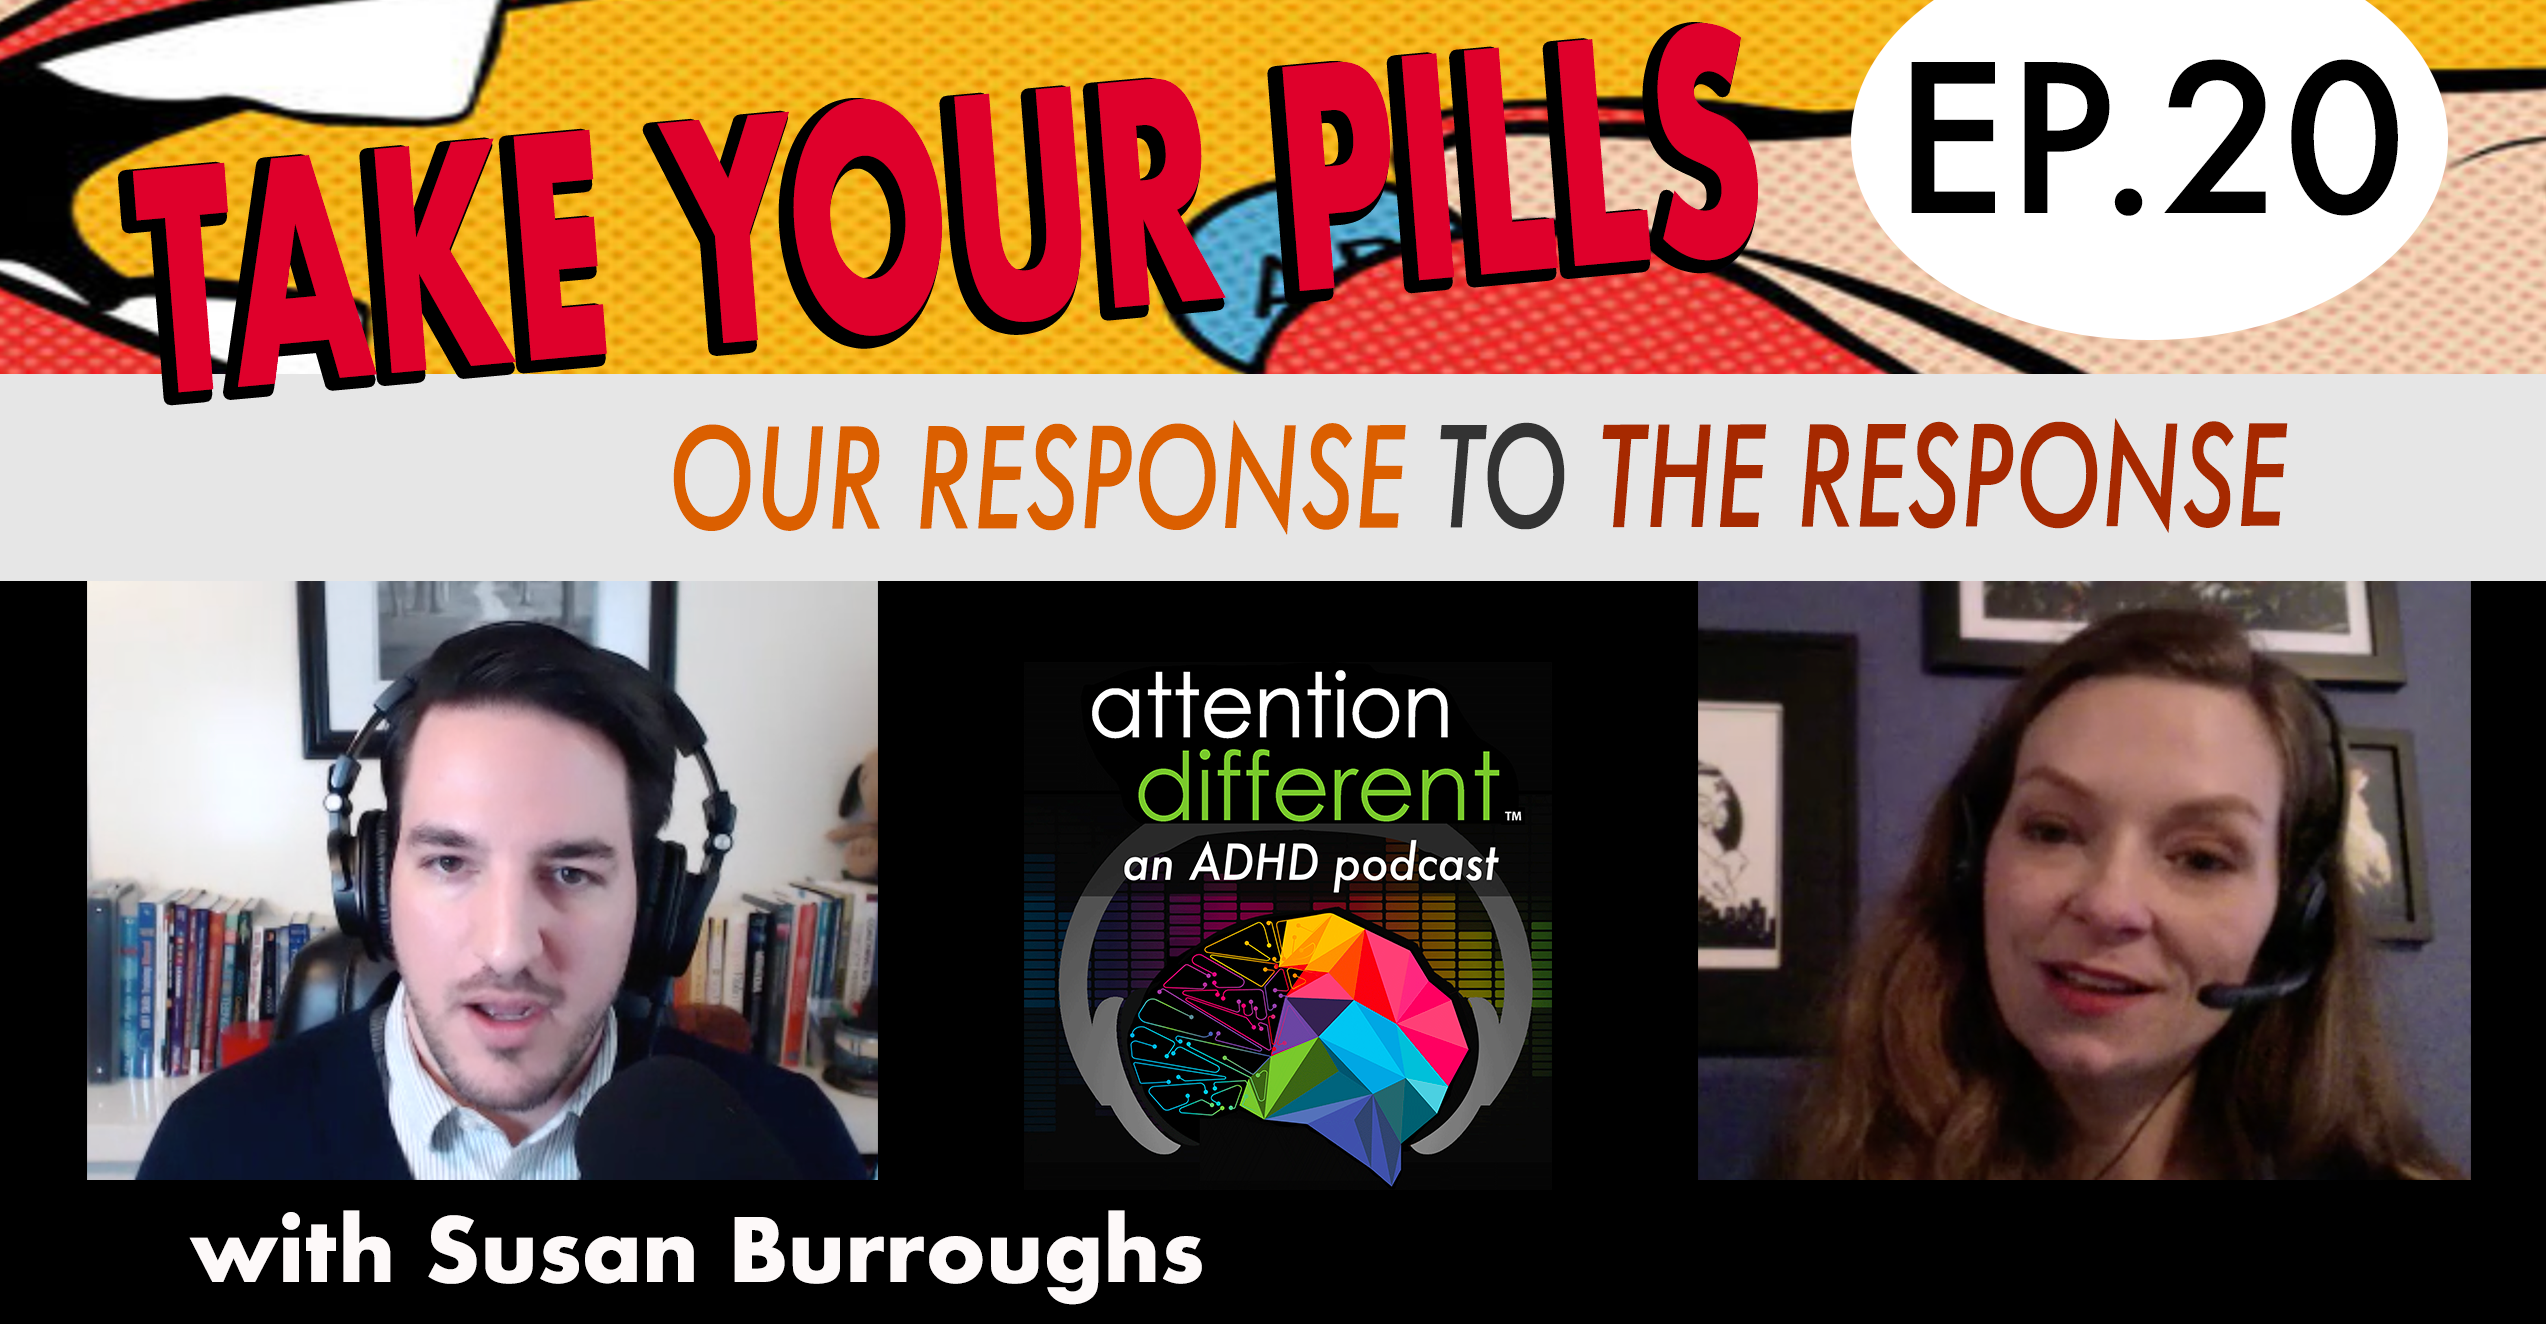 EP 20 - Take Your Pills Our Response to the Response